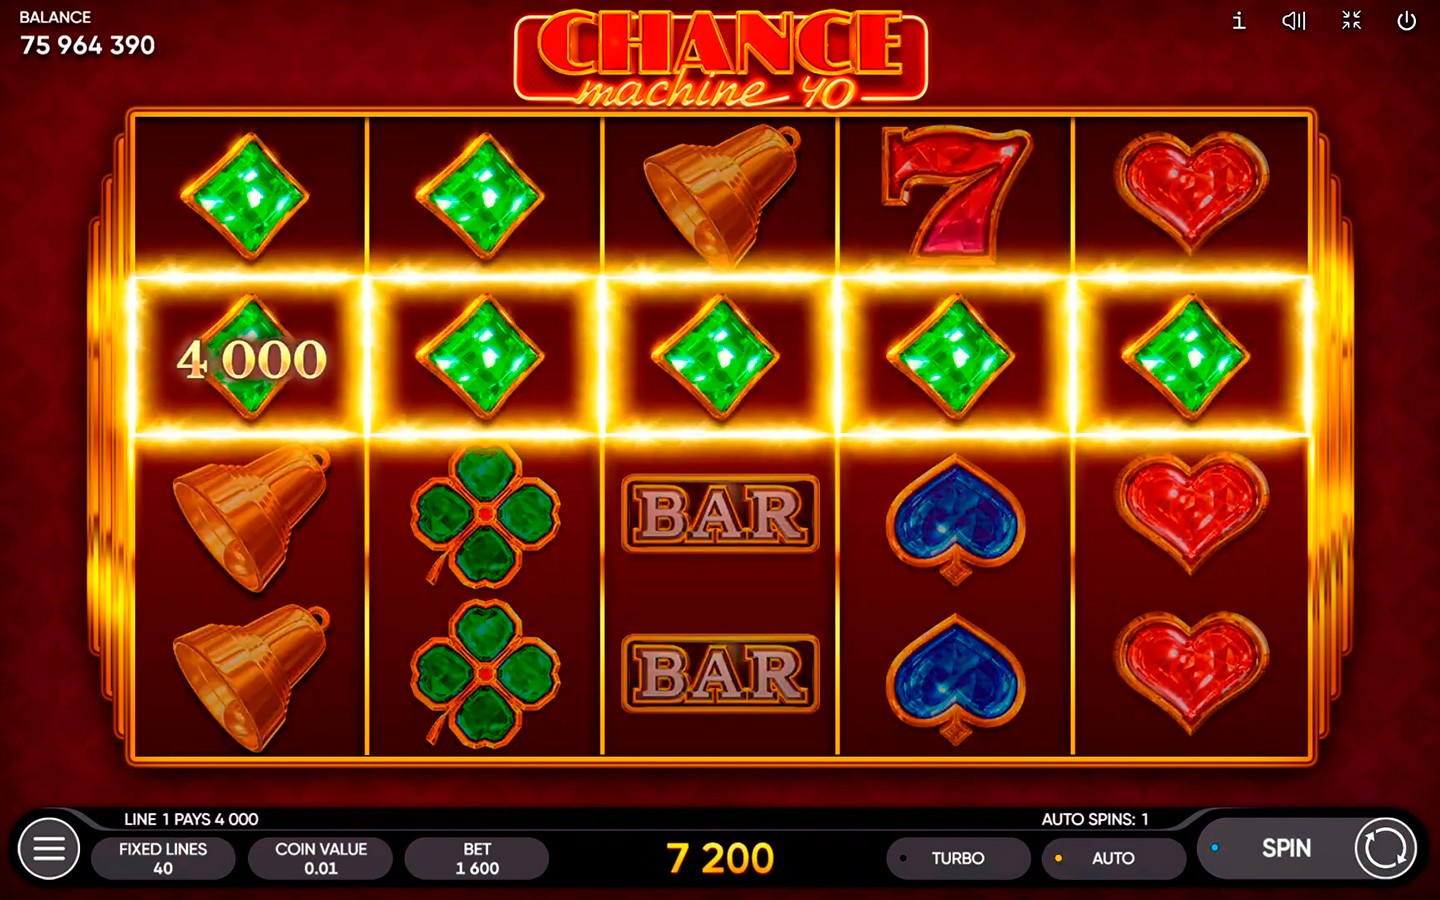 SLOT SUPPLIER | Try Chance Machine 40 game online!